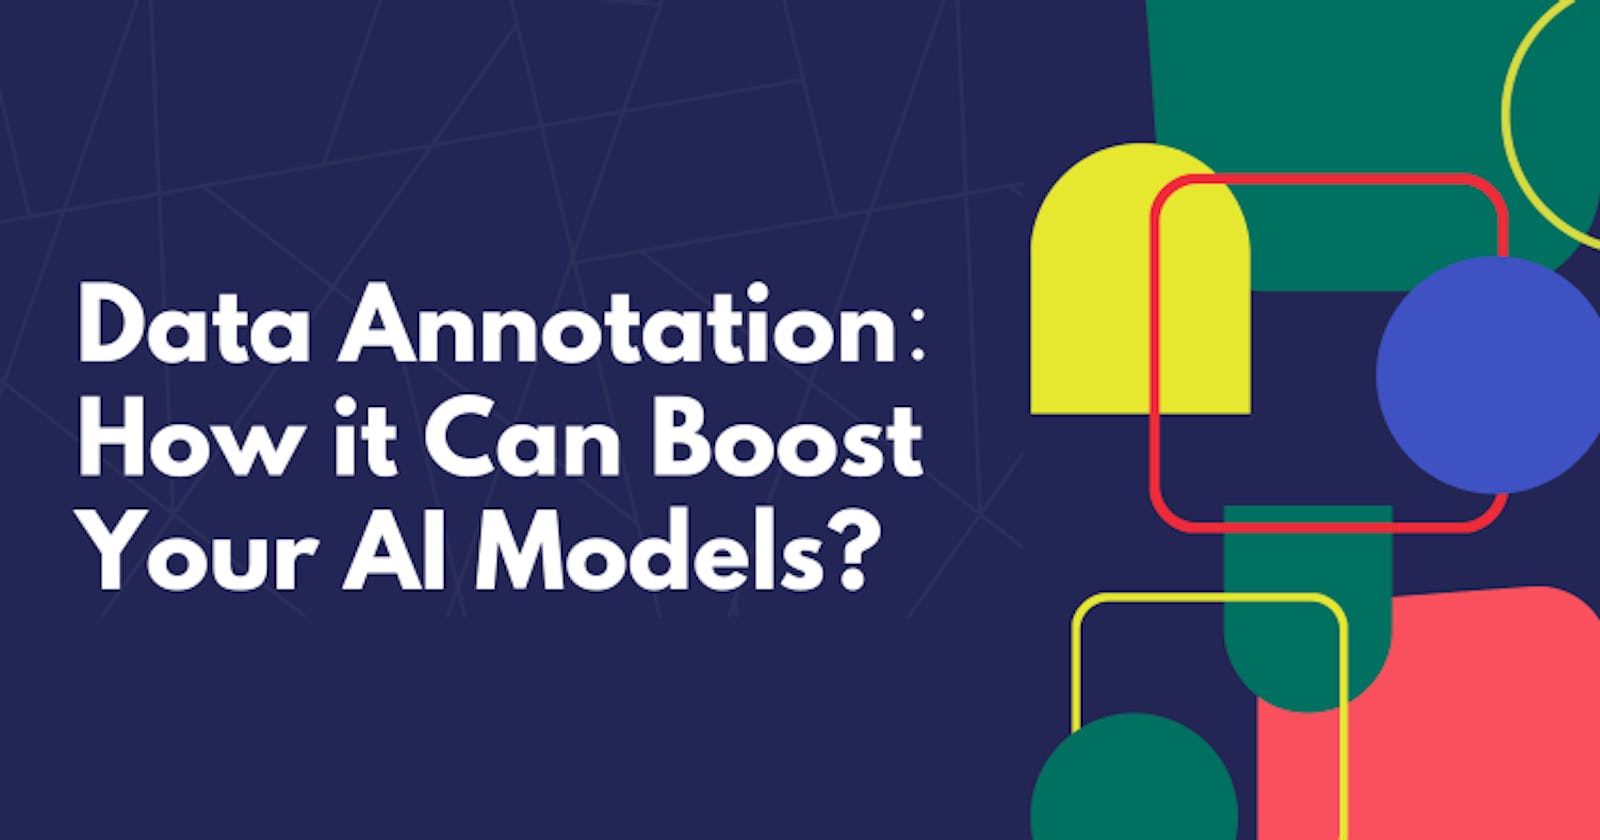 Data Annotation: How it Can Boost Your AI Models?